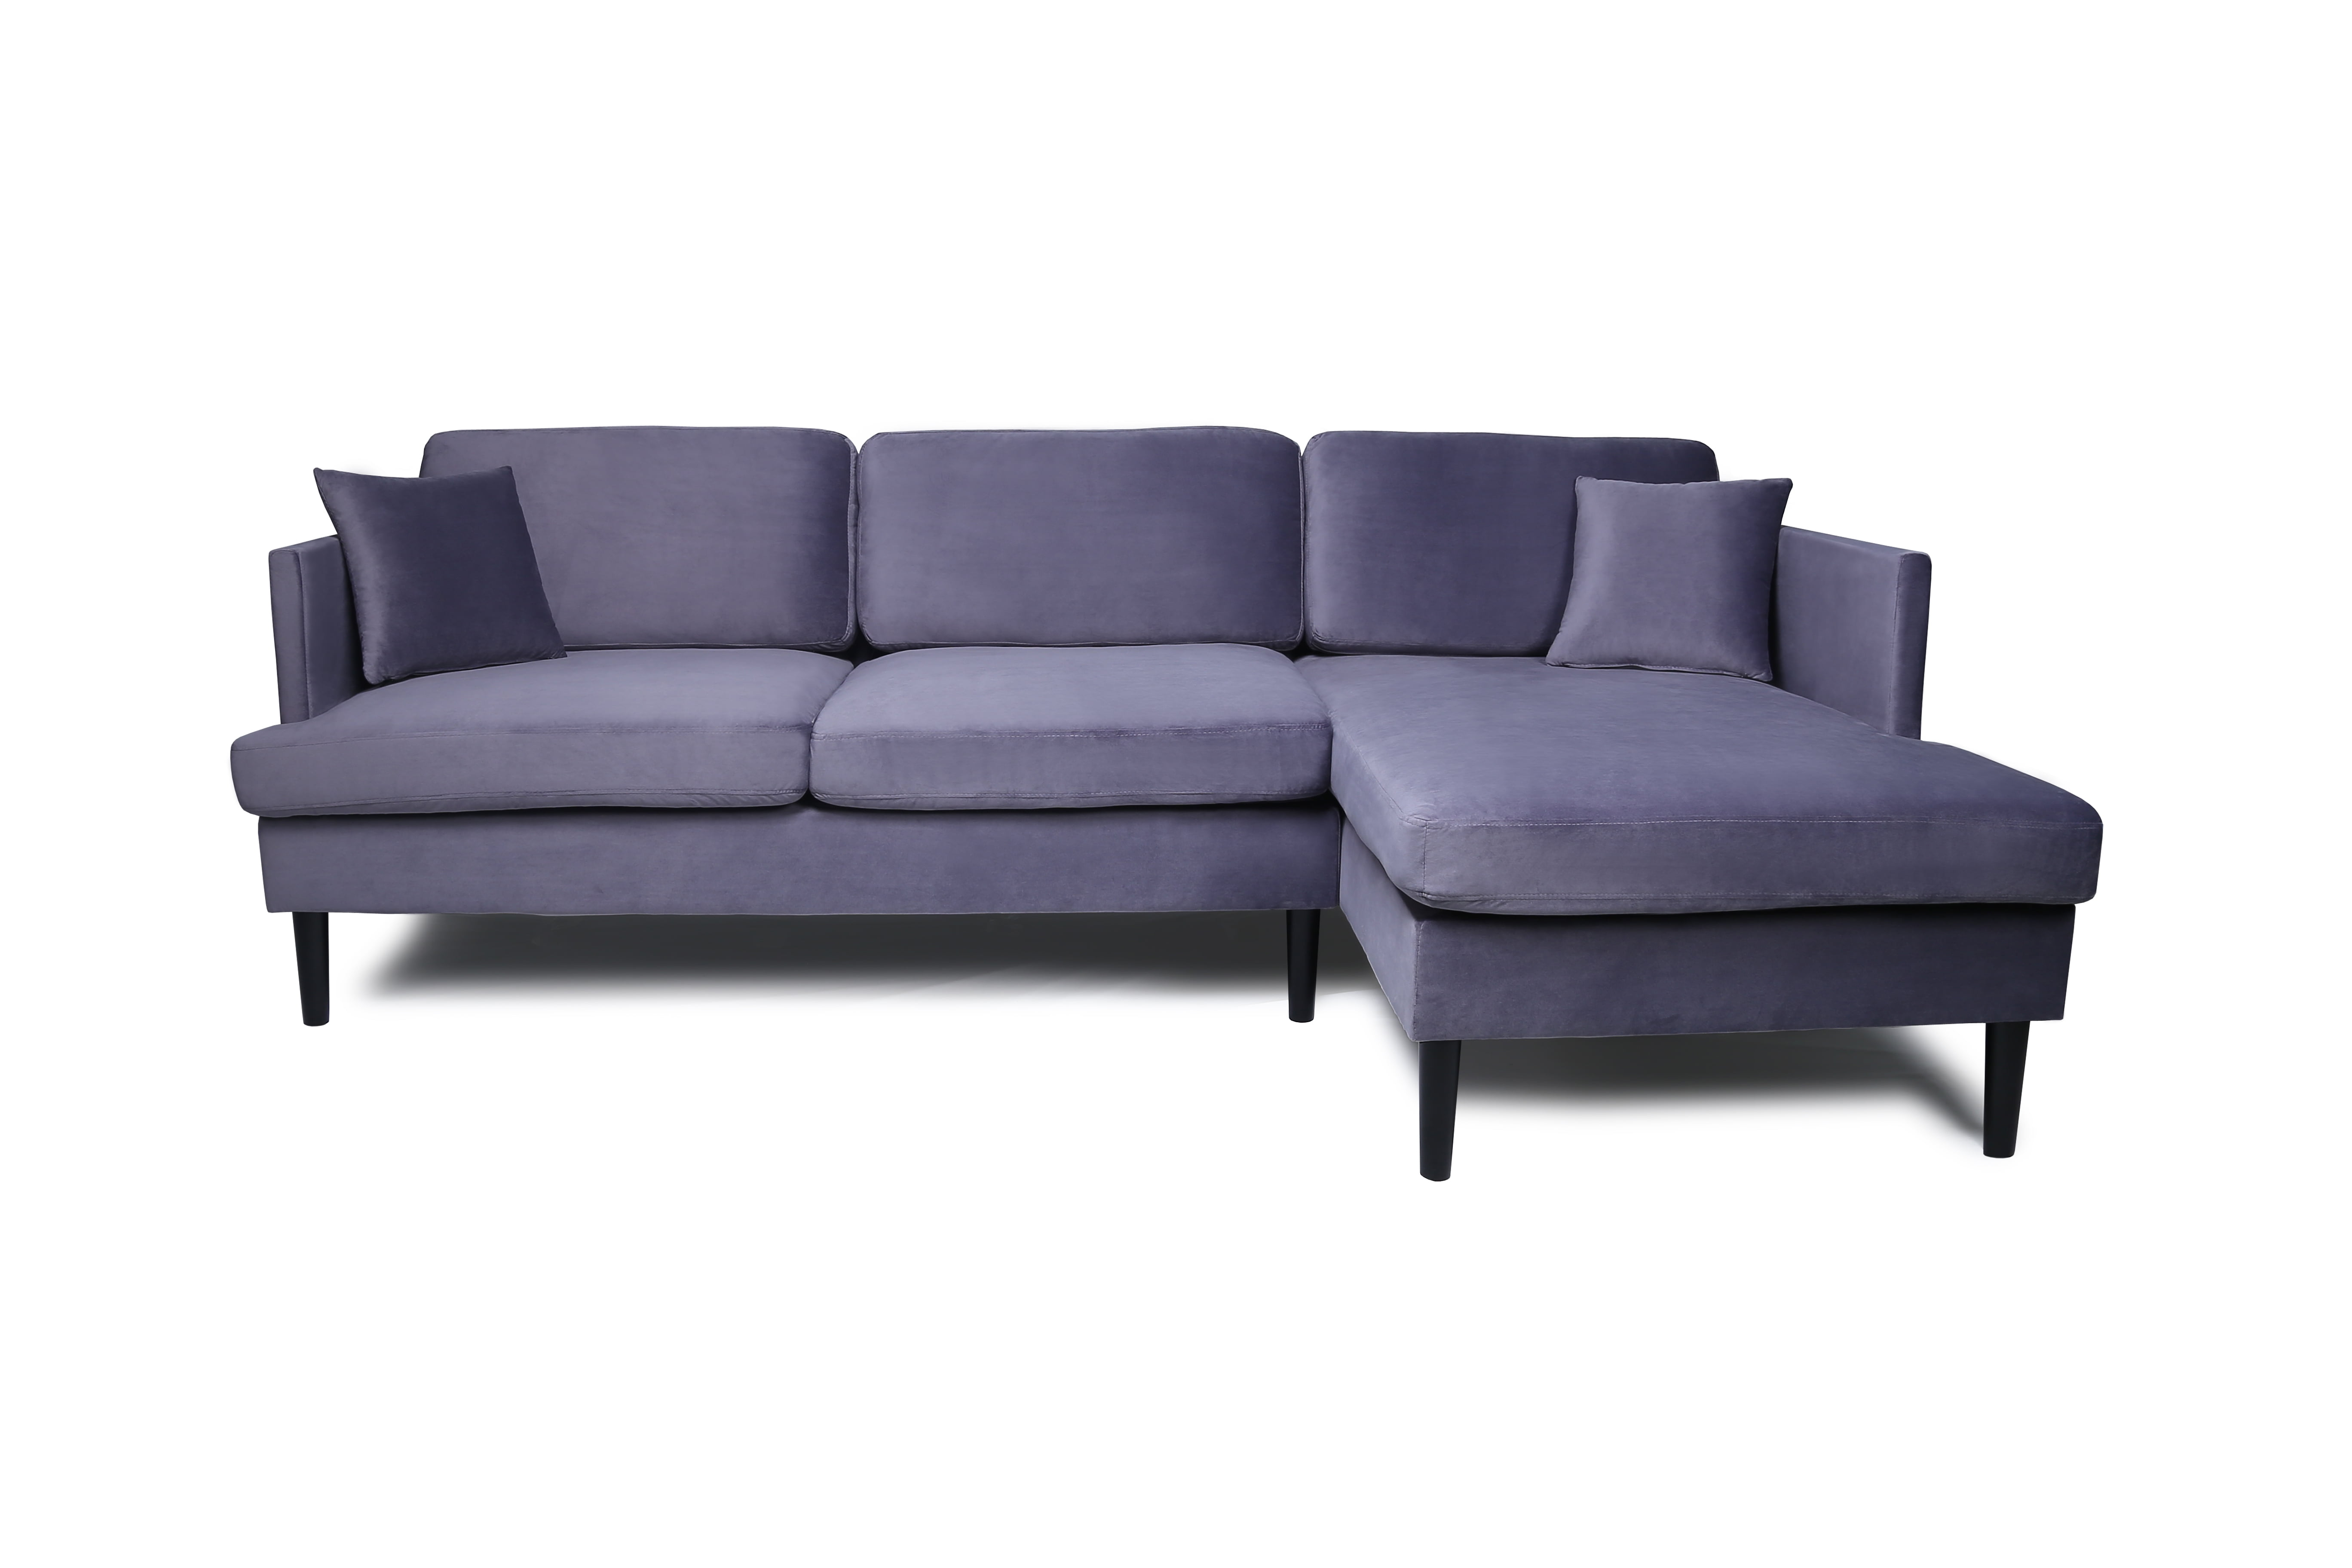 Segmart Modern Sectional Velvet Fabric, Sectional Sofas With Washable Covers